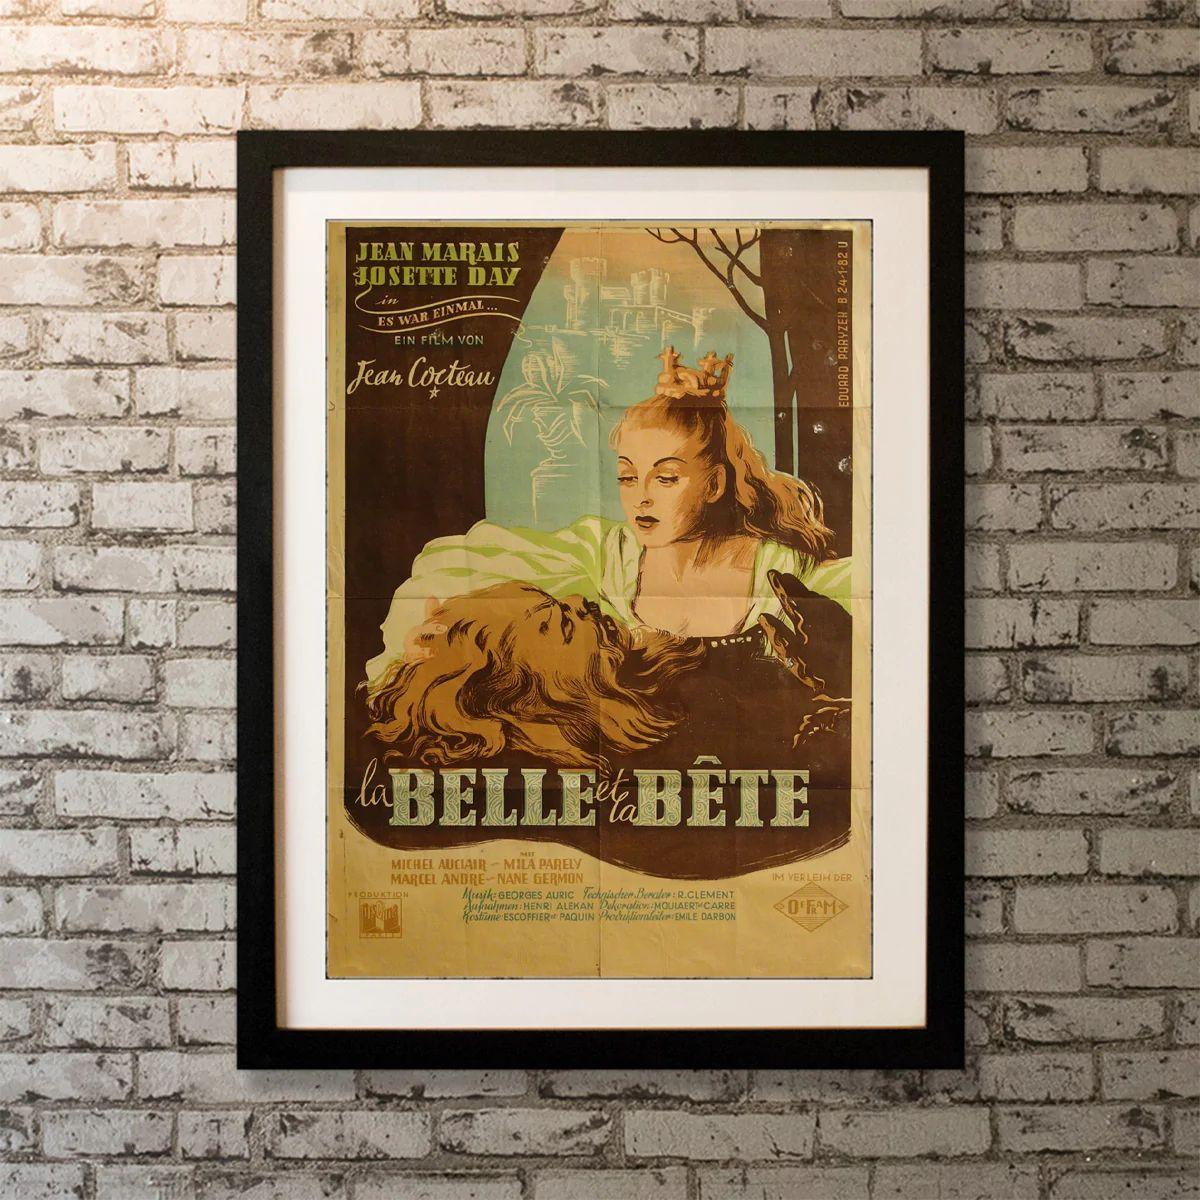 La Belle et la Bete / Beauty and The Beast, Unframed Poster, 1946

Original Austrian Poster (23 X 33 Inches). Very rare original release Austrian movie poster, from first release 1948. A mysterious monster forces a young innocent to share his life